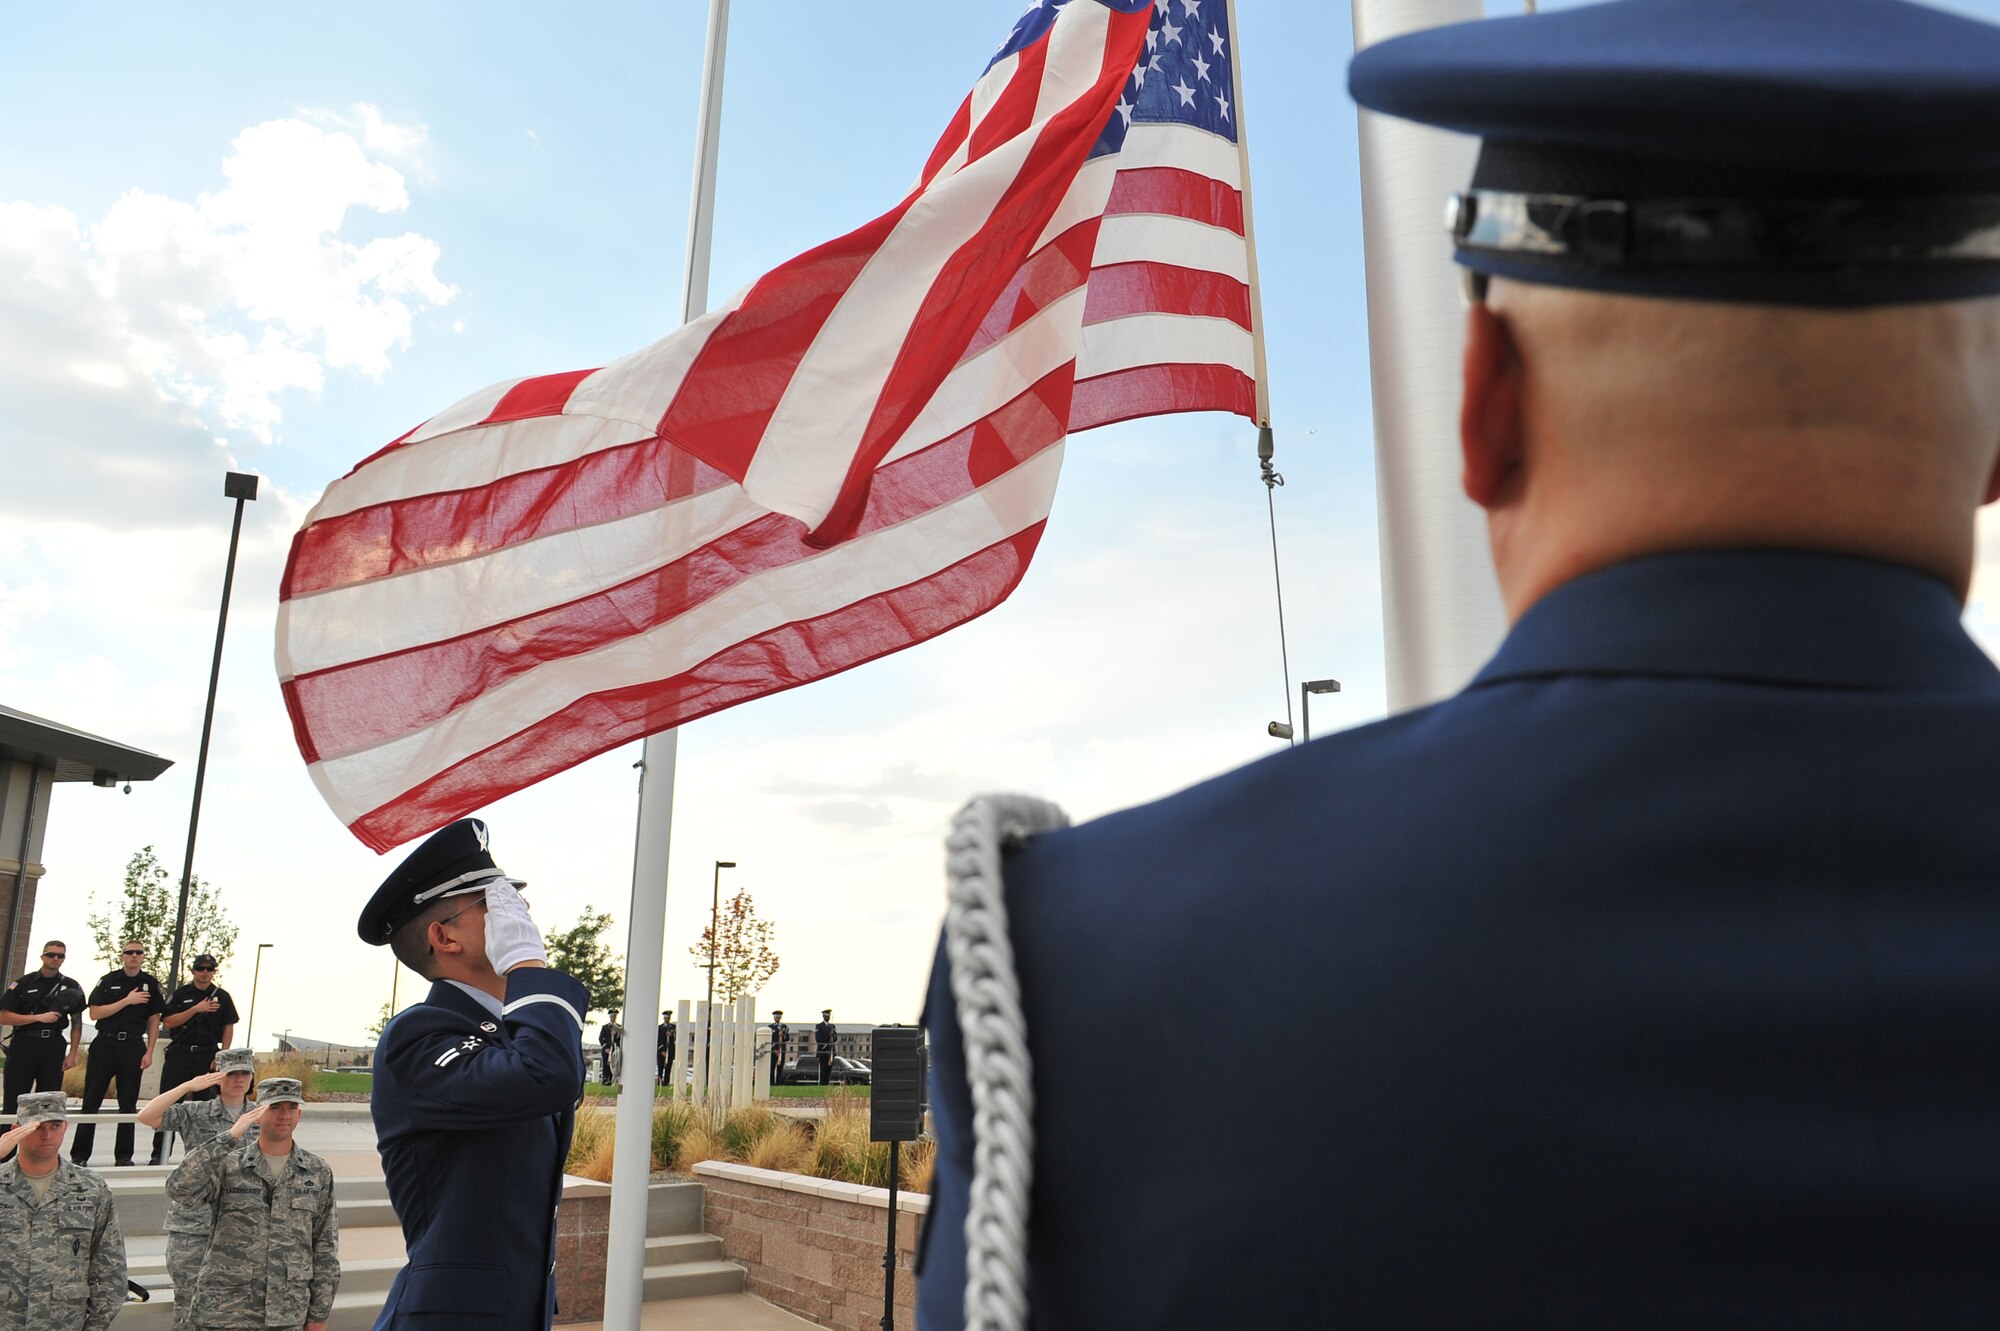 BUCKLEY AIR FORCE BASE, Colo. -- Mile High honor guardsmen lower the flag during retreat here Sept. 9, 2011. Team Buckley's Patriot Day Ceremony was held during retreat here to remember the victims of 9/11. (U.S. Air Force photo by Staff Sgt. Kathrine McDowell)  
